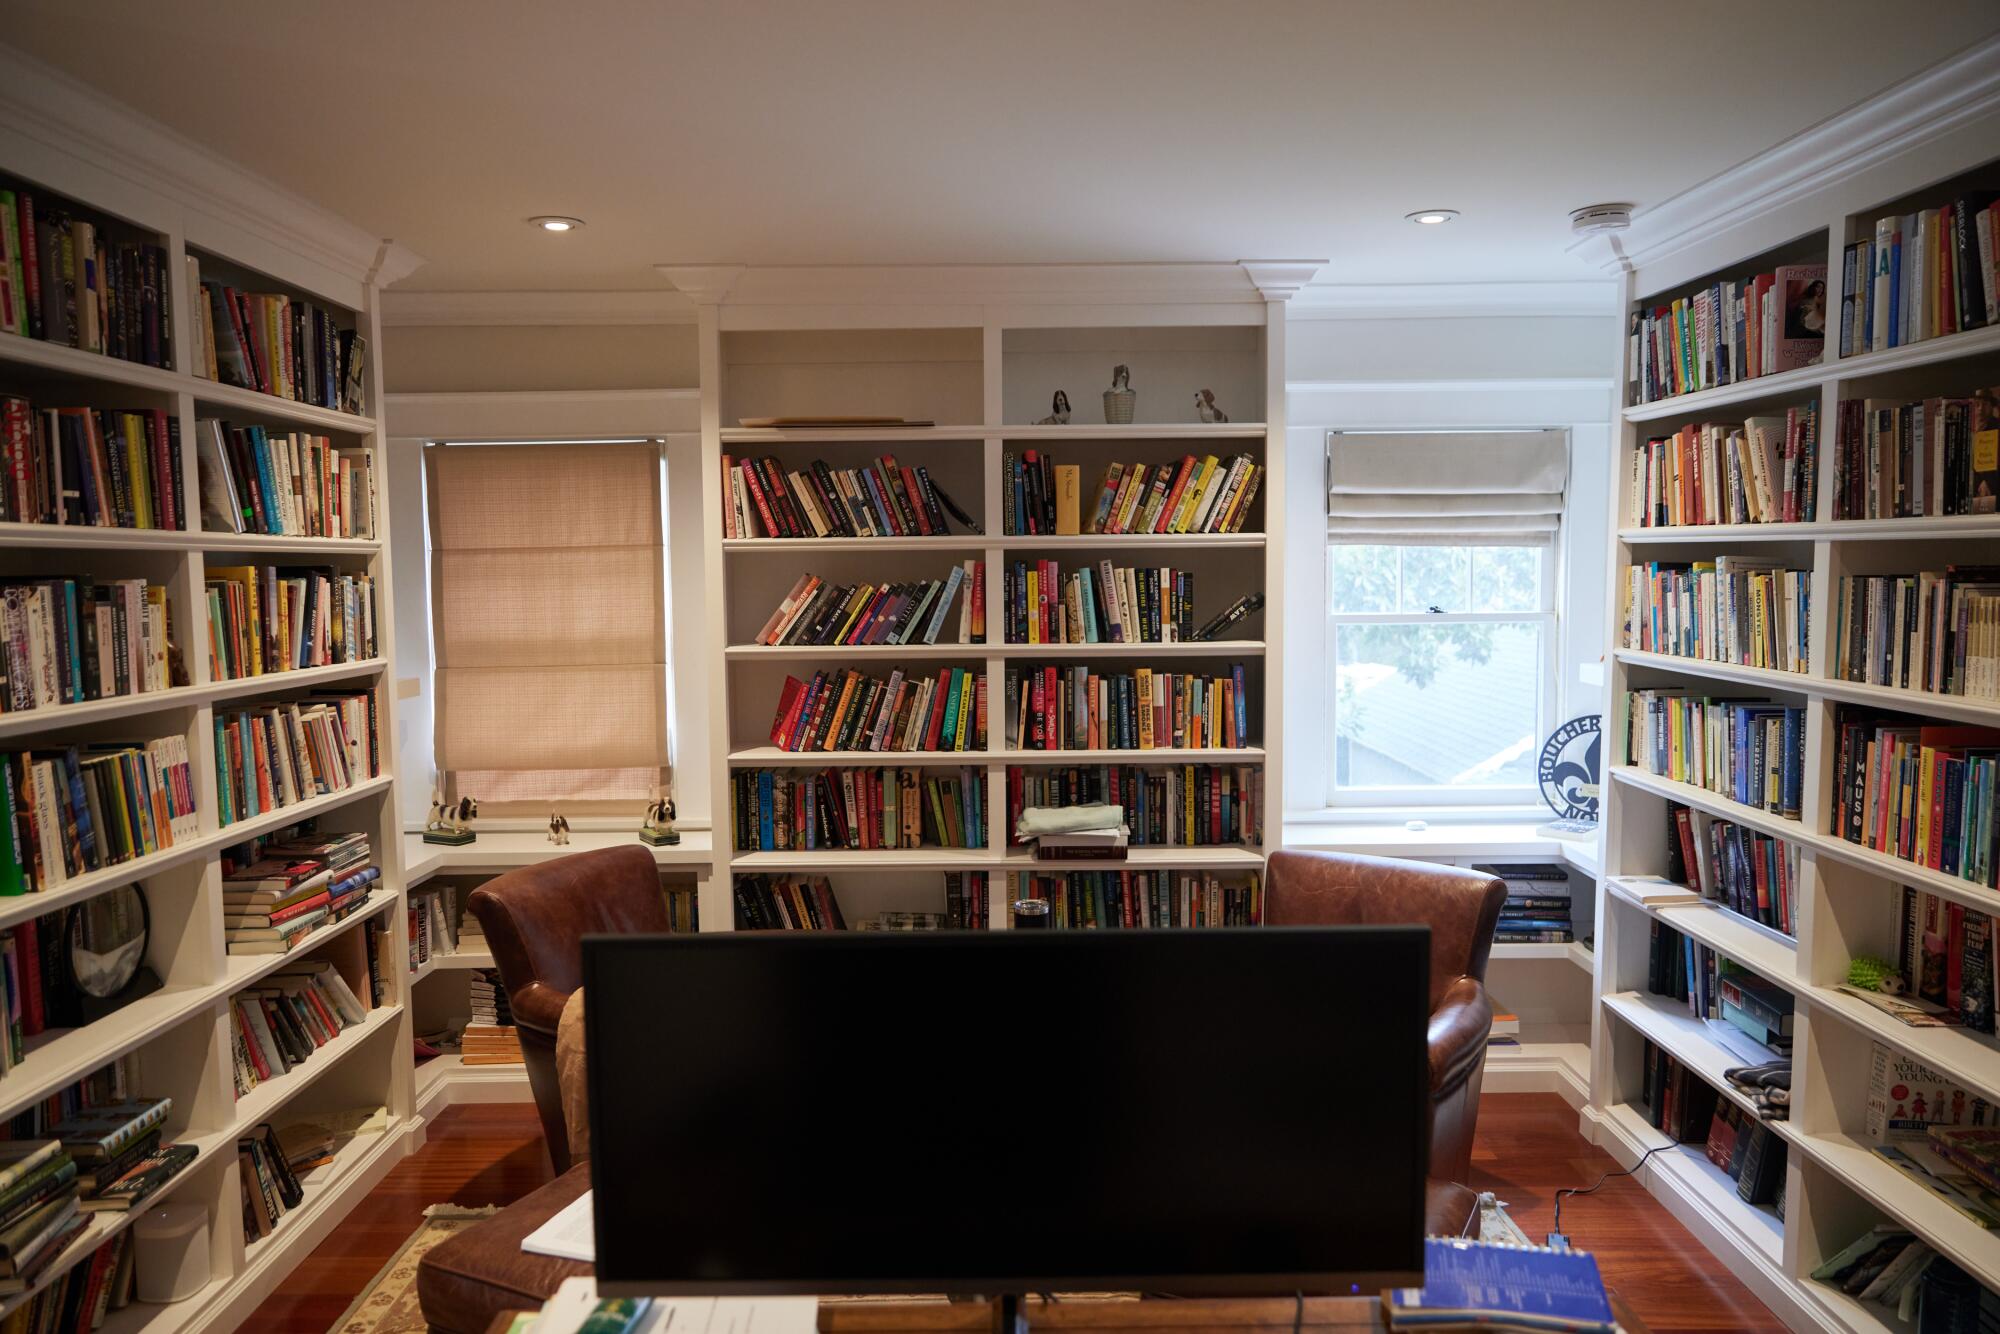 A photo of a room, where three of the walls are covered in bookshelves.